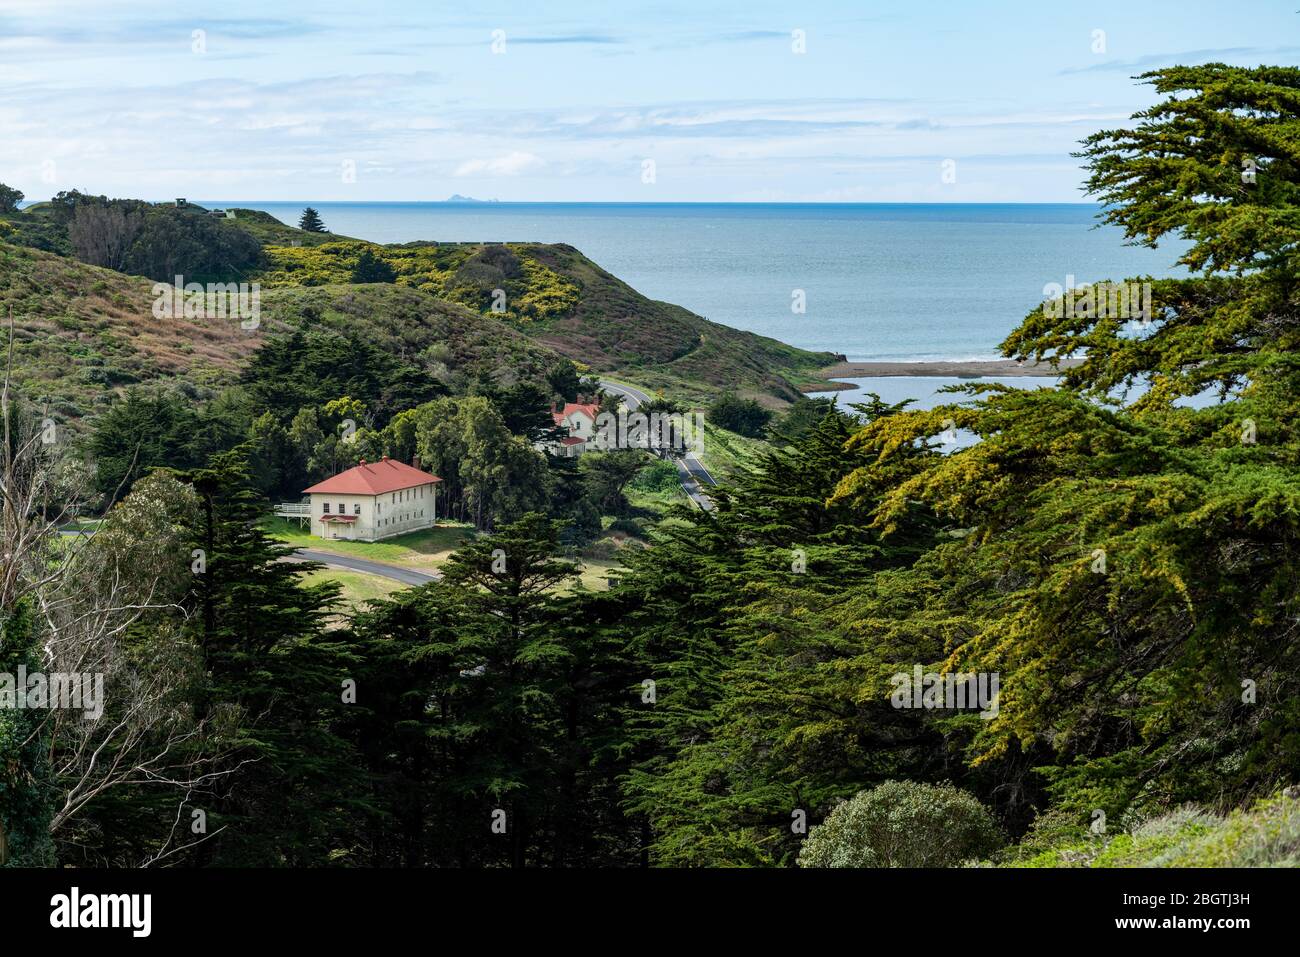 Landscape with coastal buildings just inland from Pacific Ocean Stock Photo